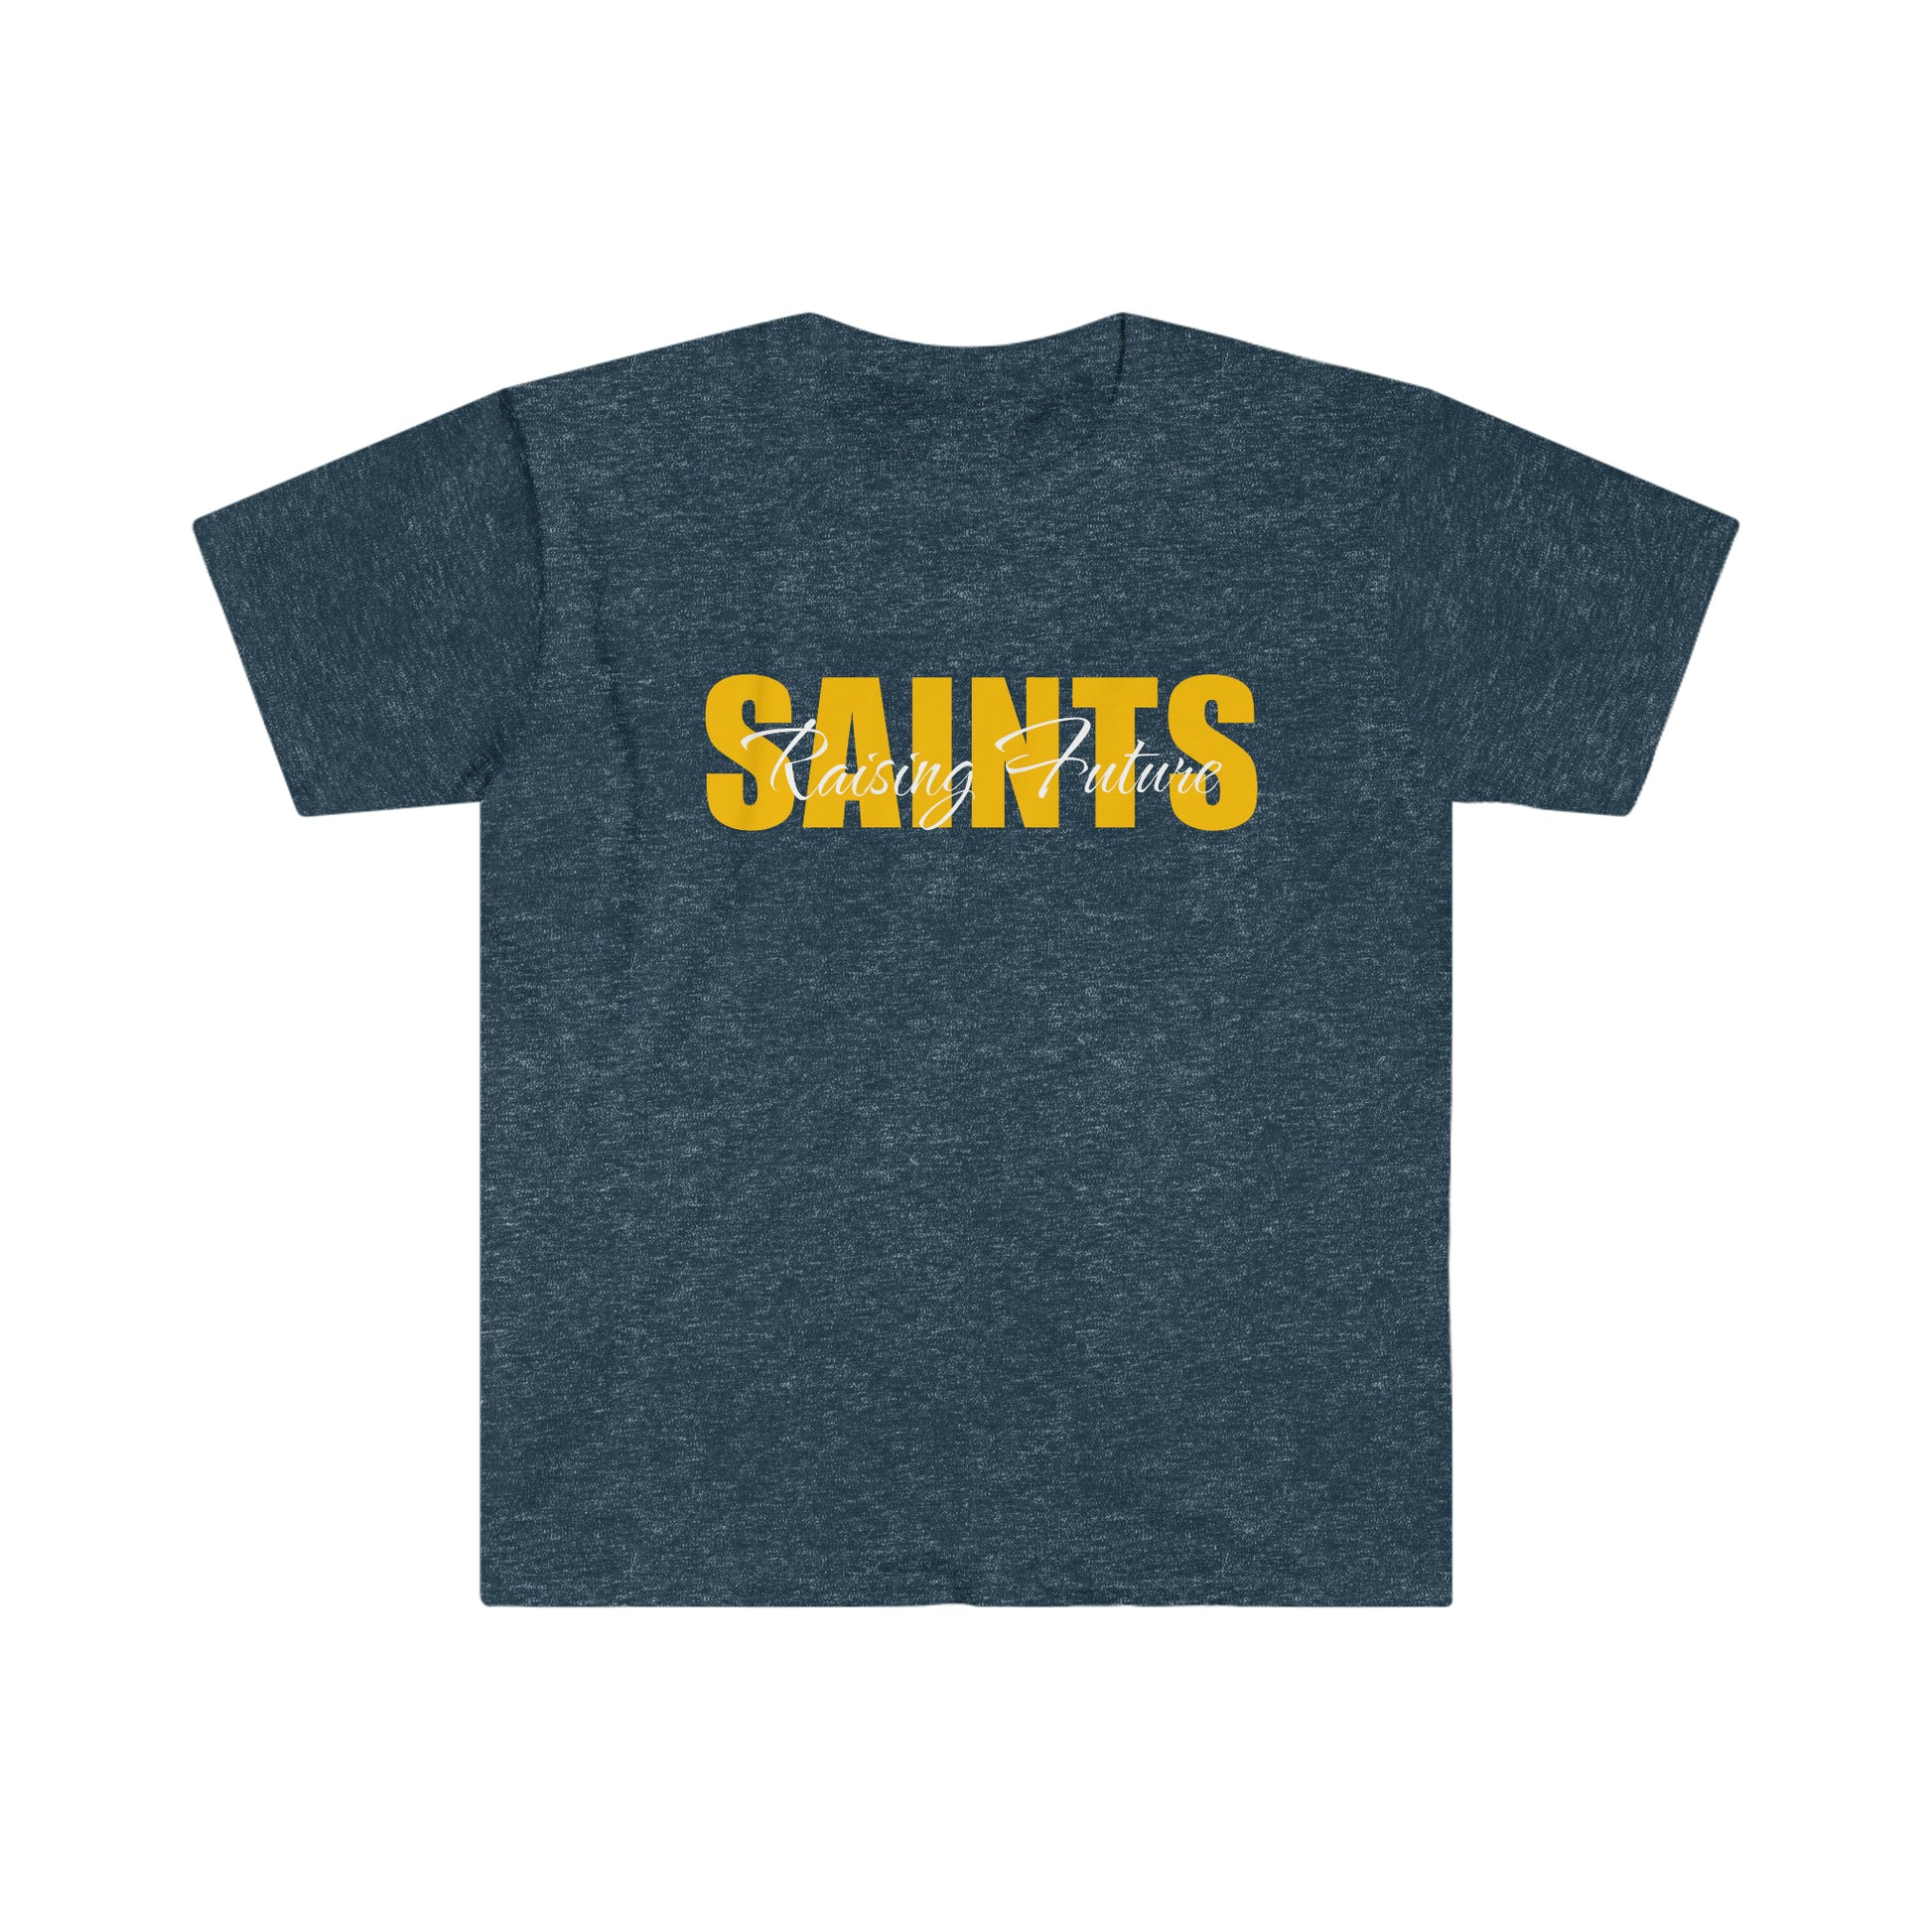 Heather navy blue t-shirt with "Raising Future Saints" printed on it.